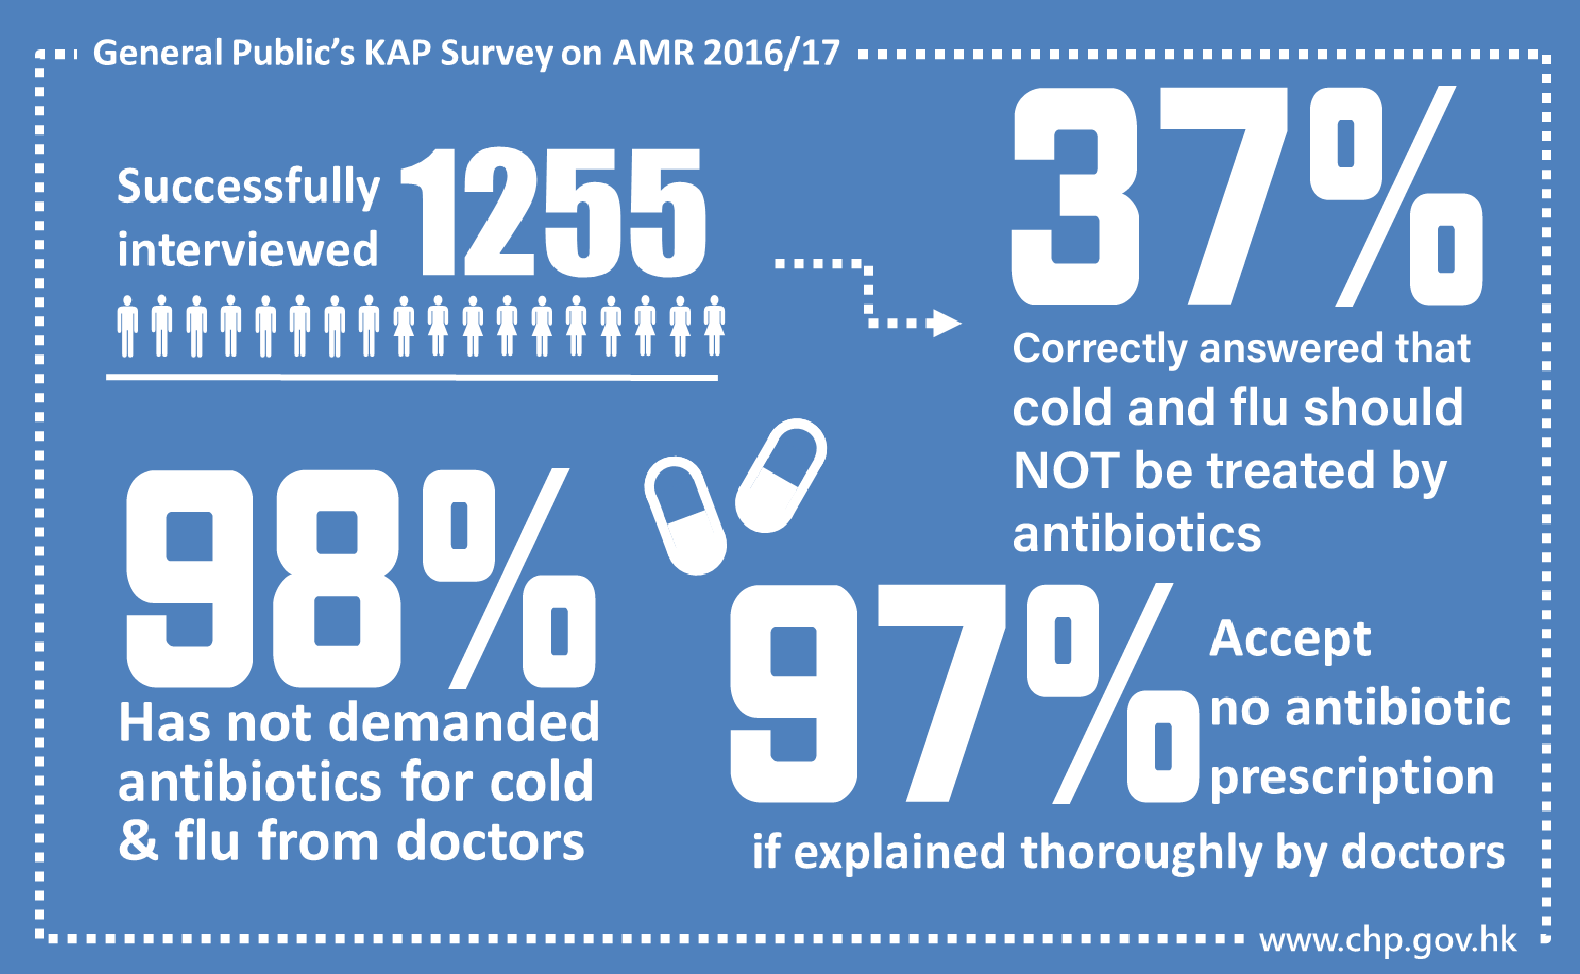 General Public's Knowledge, Attitude and Practice Survey on Antimicrobial Resistance 2016/17